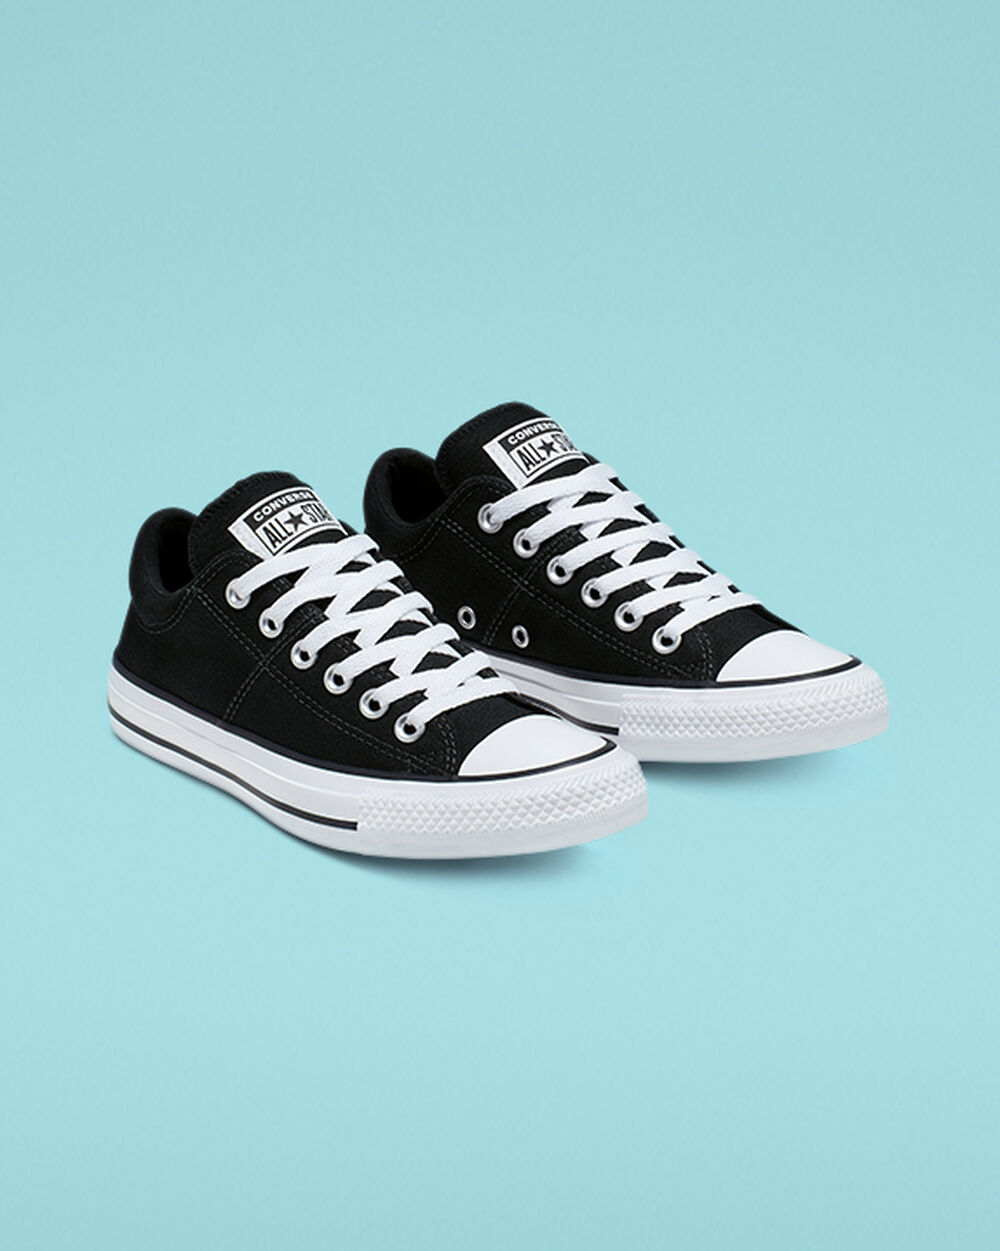 Tenis Converse Chuck Taylor All Star Madison Mujer Negros Blancos Negros | Mexico-381606